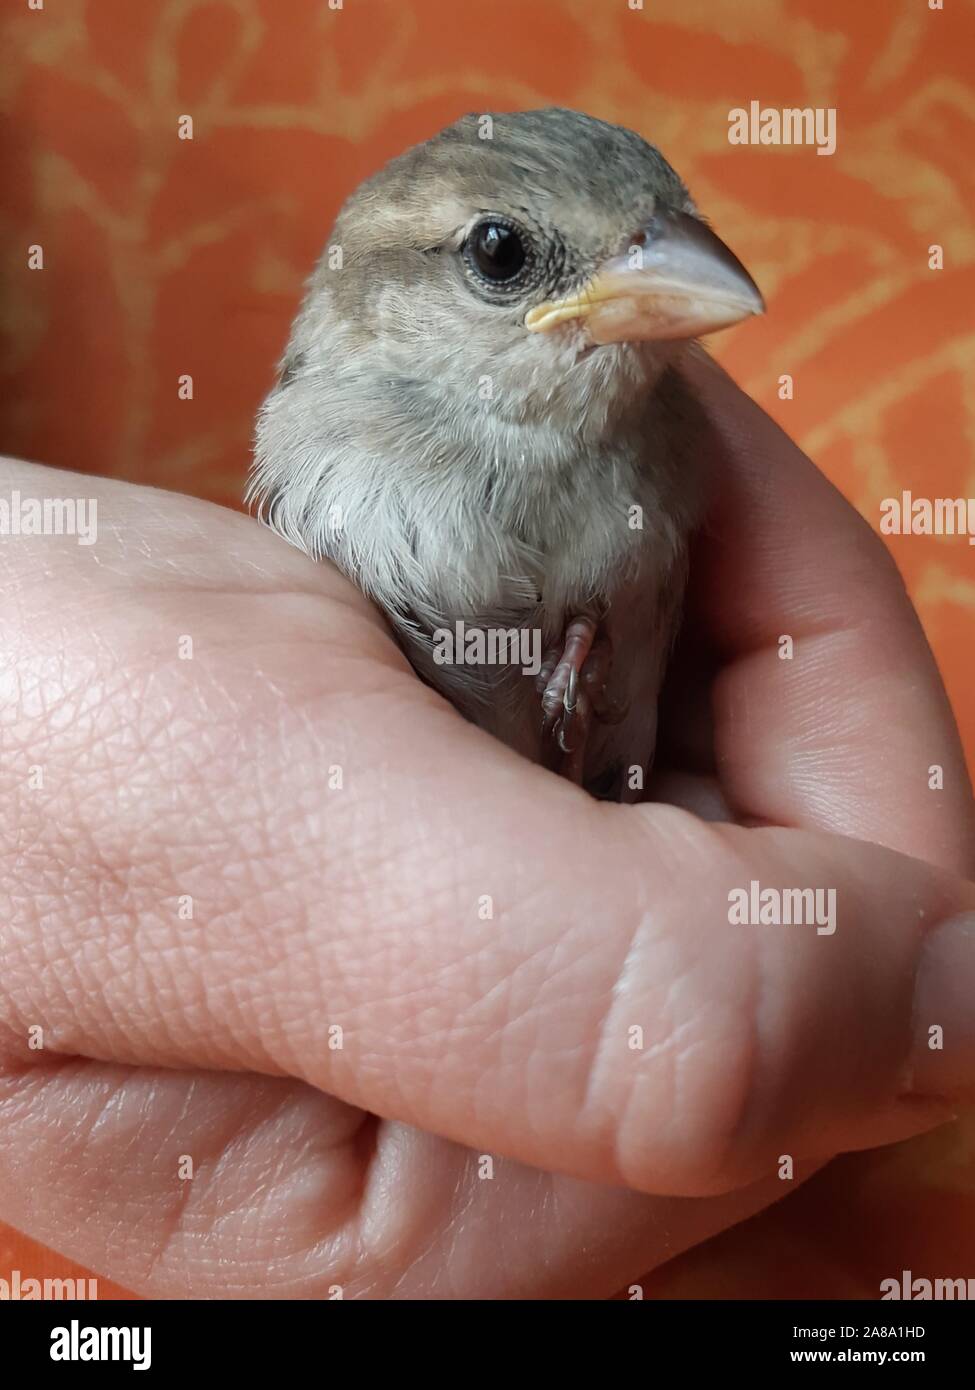 Small sparrow cuddled by a female hand Stock Photo